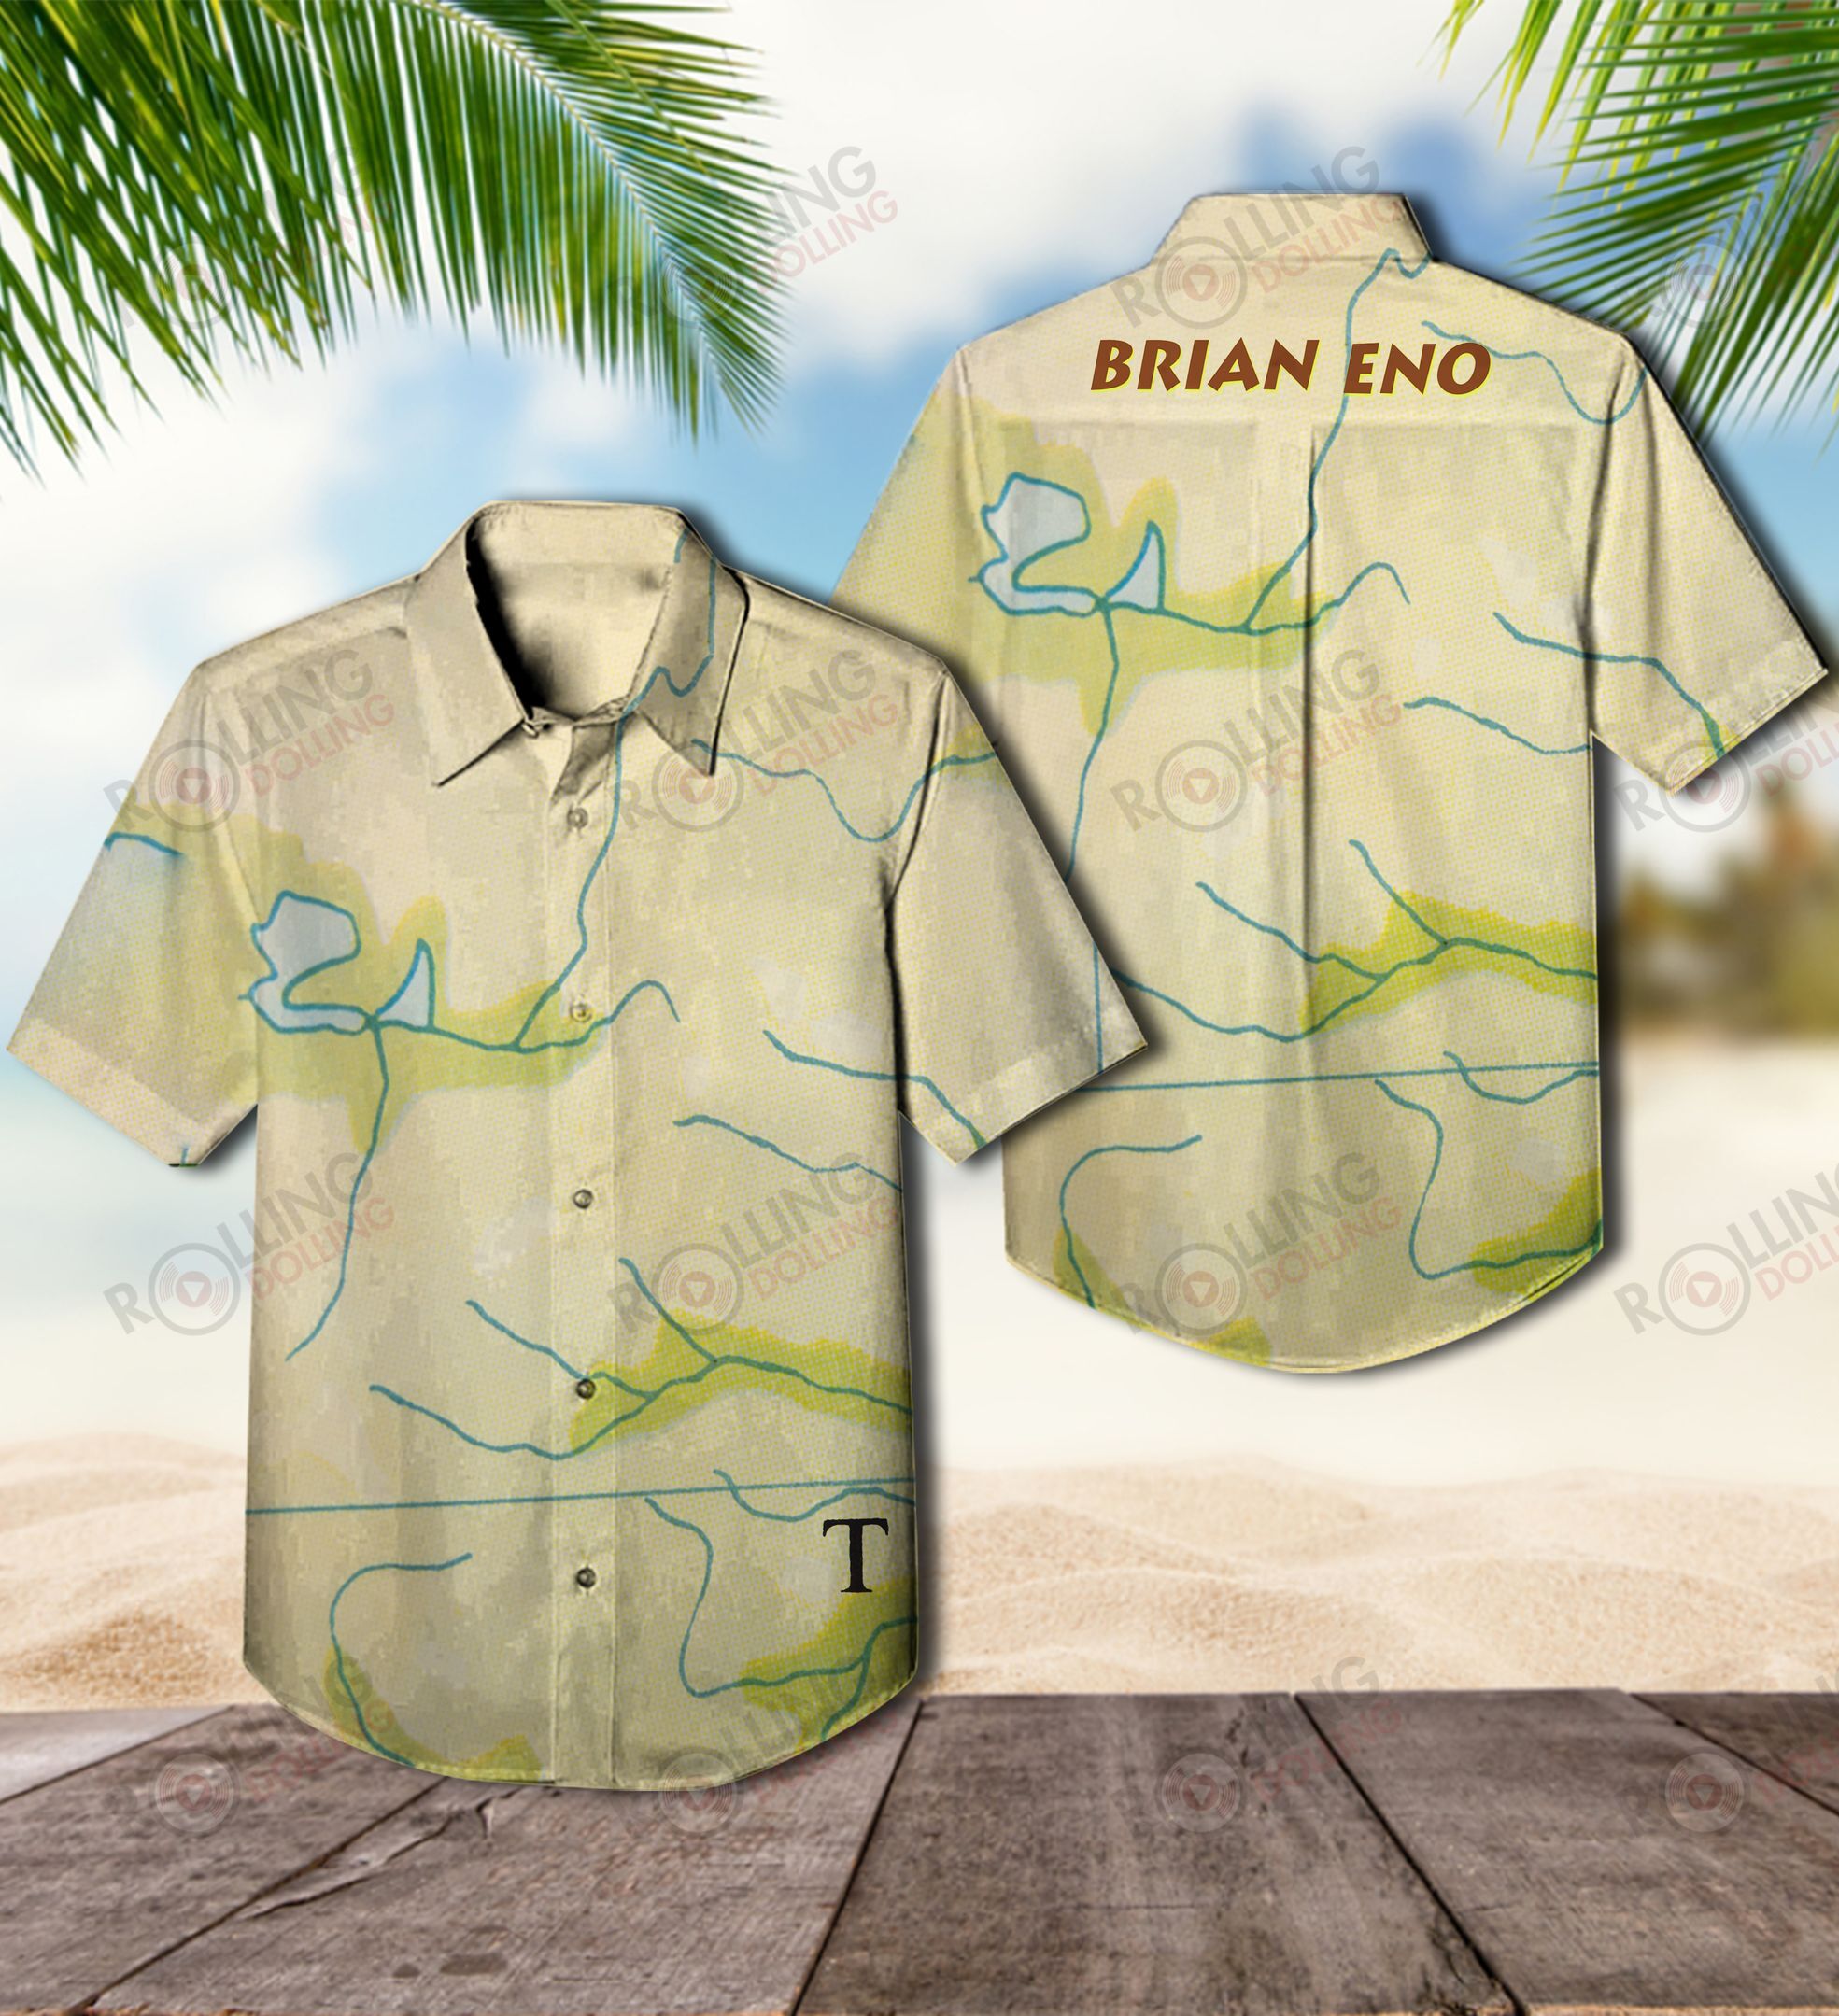 You'll have the perfect vacation outfit with this Hawaiian shirt 297